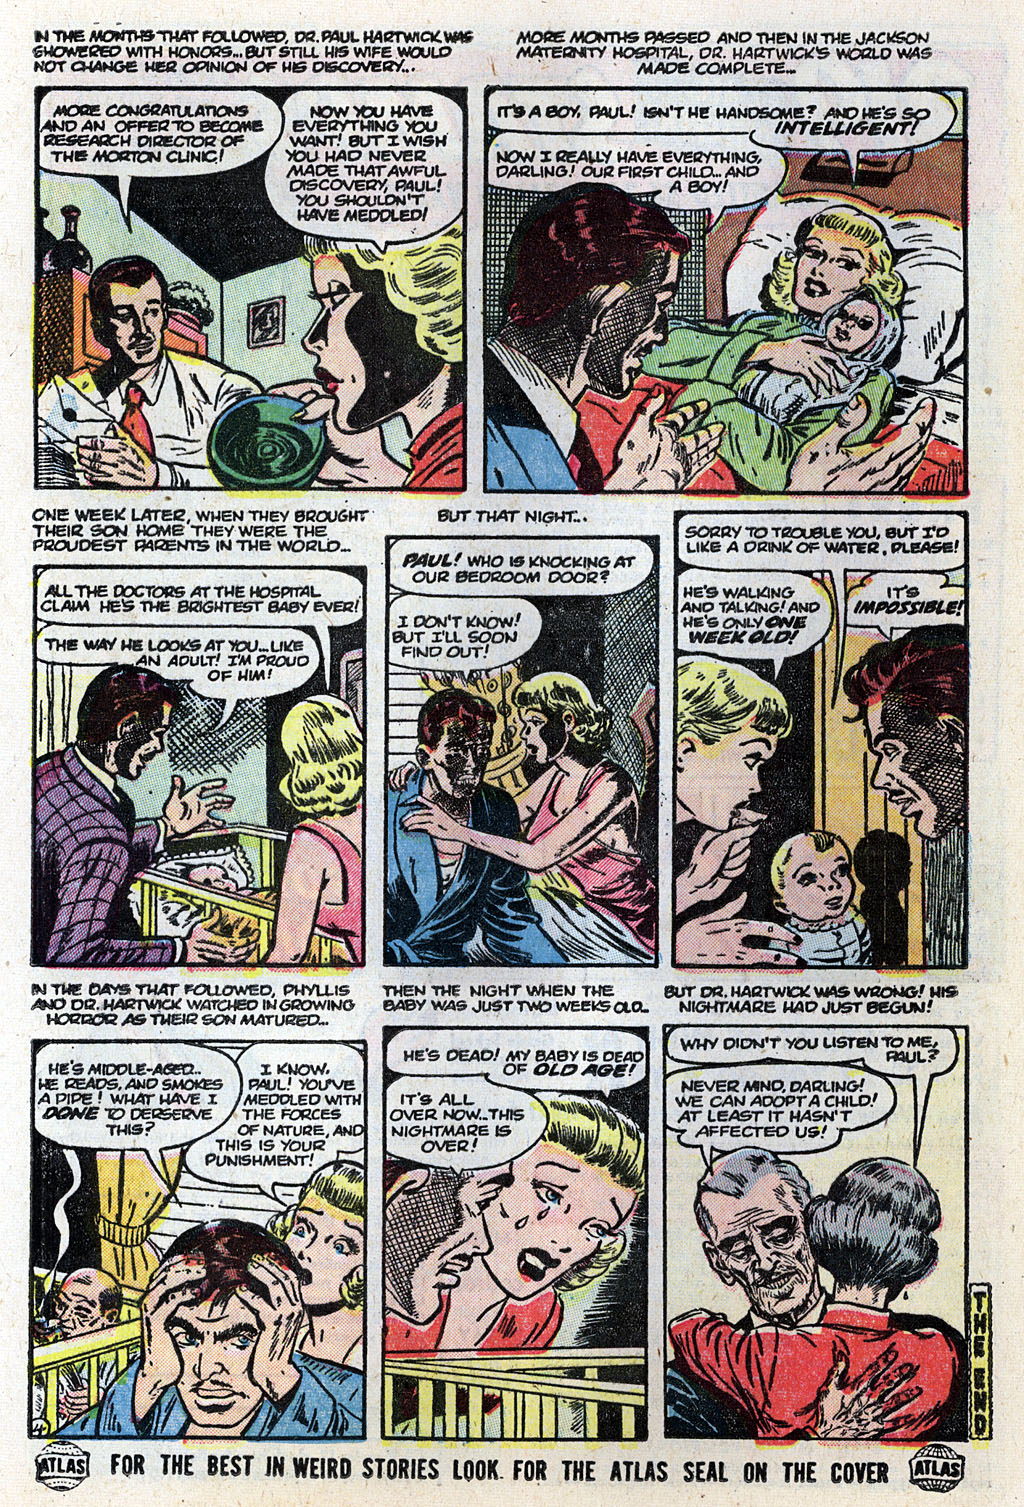 Marvel Tales (1949) 128 Page 19